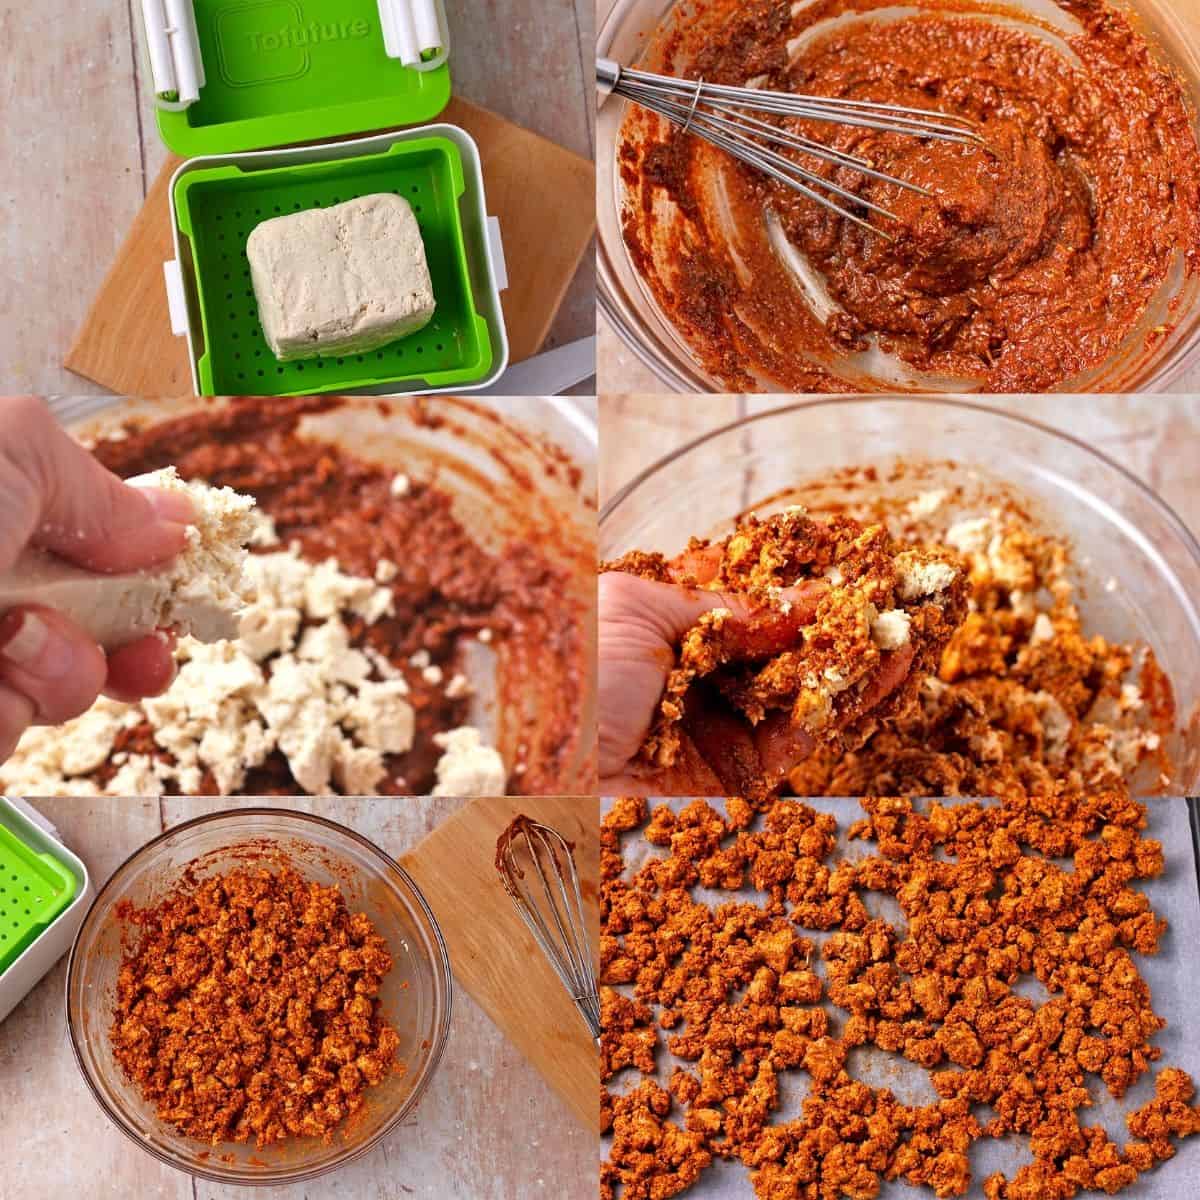 Pictures demonstrate how to make vegan tofu sausage crumbles.